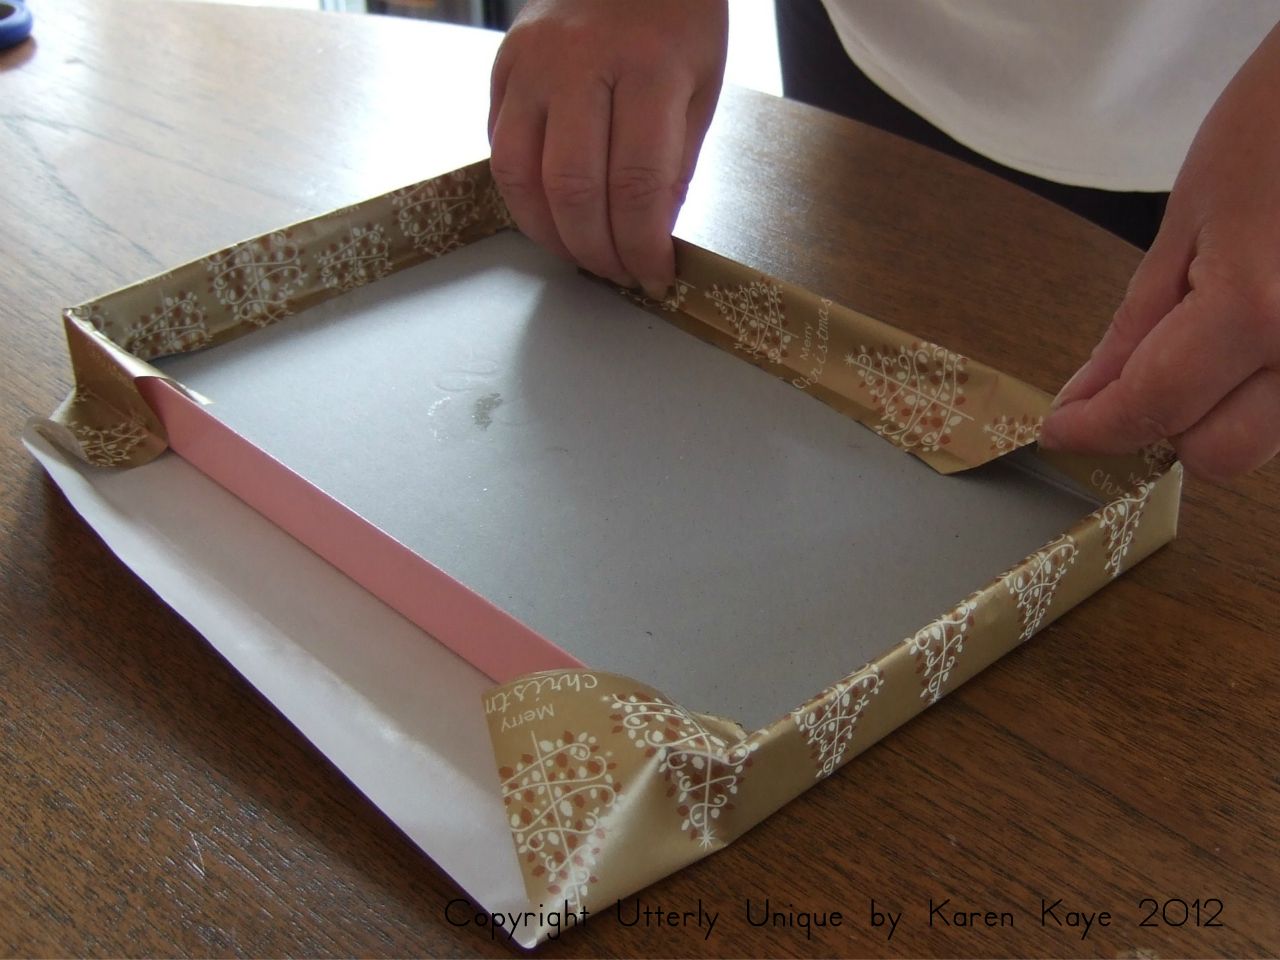 Utterly Unique by Karen Kaye: Christmas Gift Wrapping Tips & Ideas: How to wrap a shoebox